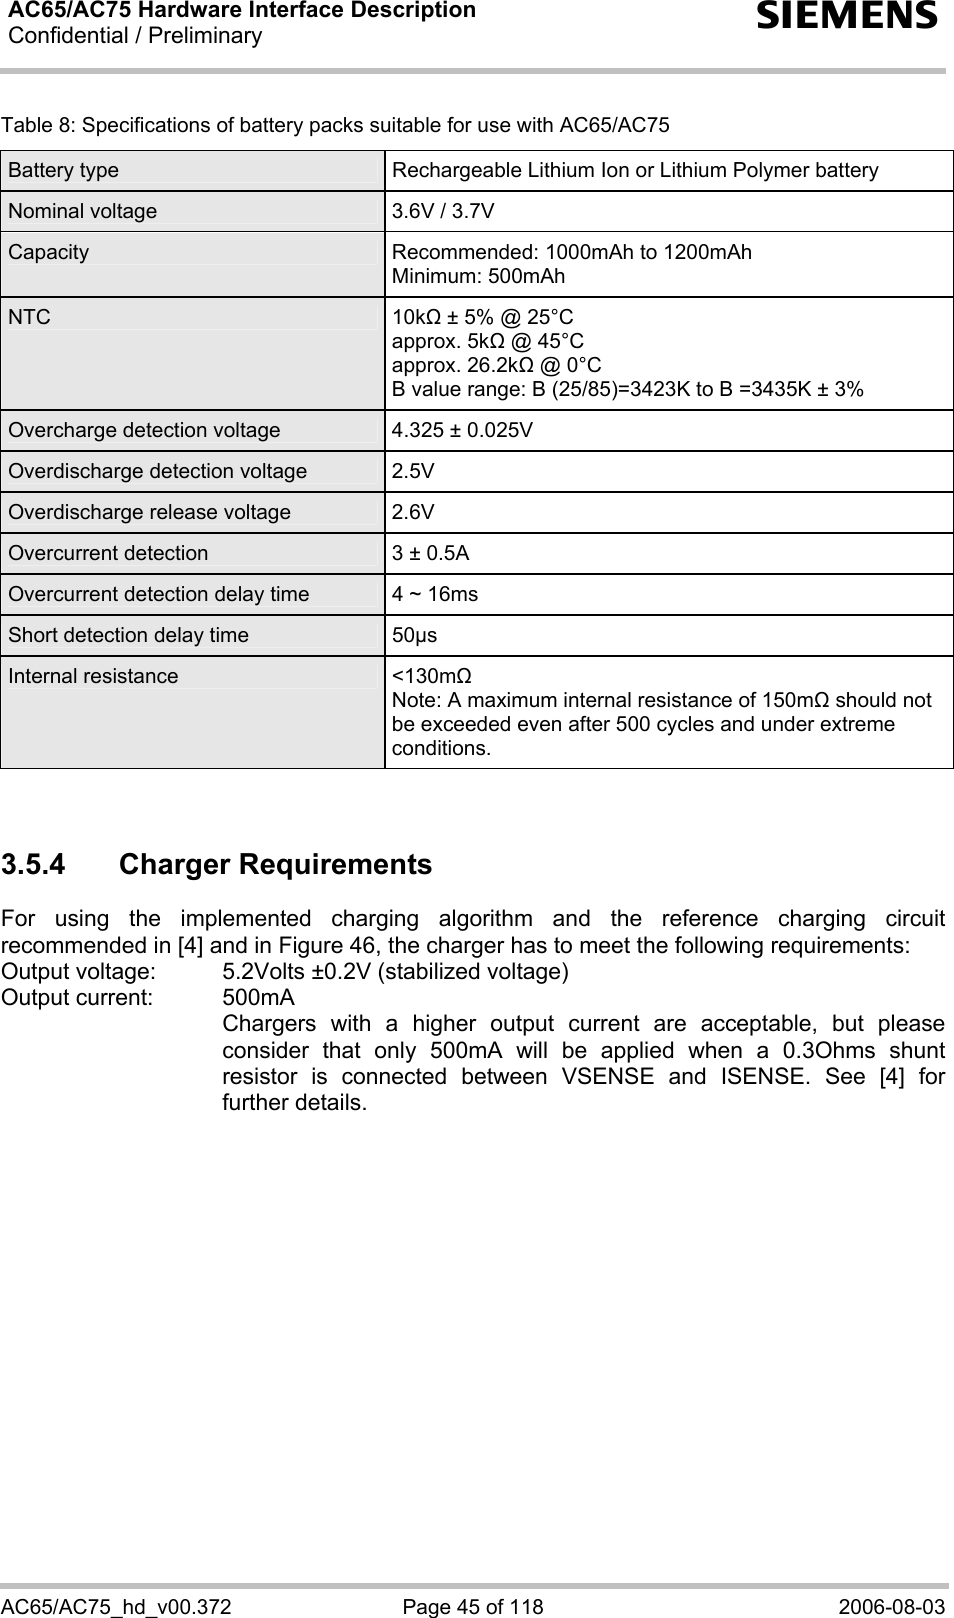 AC65/AC75 Hardware Interface Description Confidential / Preliminary  s AC65/AC75_hd_v00.372  Page 45 of 118  2006-08-03 Table 8: Specifications of battery packs suitable for use with AC65/AC75 Battery type  Rechargeable Lithium Ion or Lithium Polymer battery Nominal voltage  3.6V / 3.7V Capacity  Recommended: 1000mAh to 1200mAh Minimum: 500mAh NTC 10k ± 5% @ 25°C approx. 5k @ 45°C approx. 26.2k @ 0°C B value range: B (25/85)=3423K to B =3435K ± 3% Overcharge detection voltage  4.325 ± 0.025V Overdischarge detection voltage  2.5V Overdischarge release voltage  2.6V Overcurrent detection  3 ± 0.5A Overcurrent detection delay time  4 ~ 16ms Short detection delay time  50µs Internal resistance  &lt;130m Note: A maximum internal resistance of 150m should not be exceeded even after 500 cycles and under extreme conditions.   3.5.4 Charger Requirements For using the implemented charging algorithm and the reference charging circuit recommended in [4] and in Figure 46, the charger has to meet the following requirements: Output voltage:   5.2Volts ±0.2V (stabilized voltage) Output current:   500mA     Chargers with a higher output current are acceptable, but please consider that only 500mA will be applied when a 0.3Ohms shunt resistor is connected between VSENSE and ISENSE. See [4] for further details.  